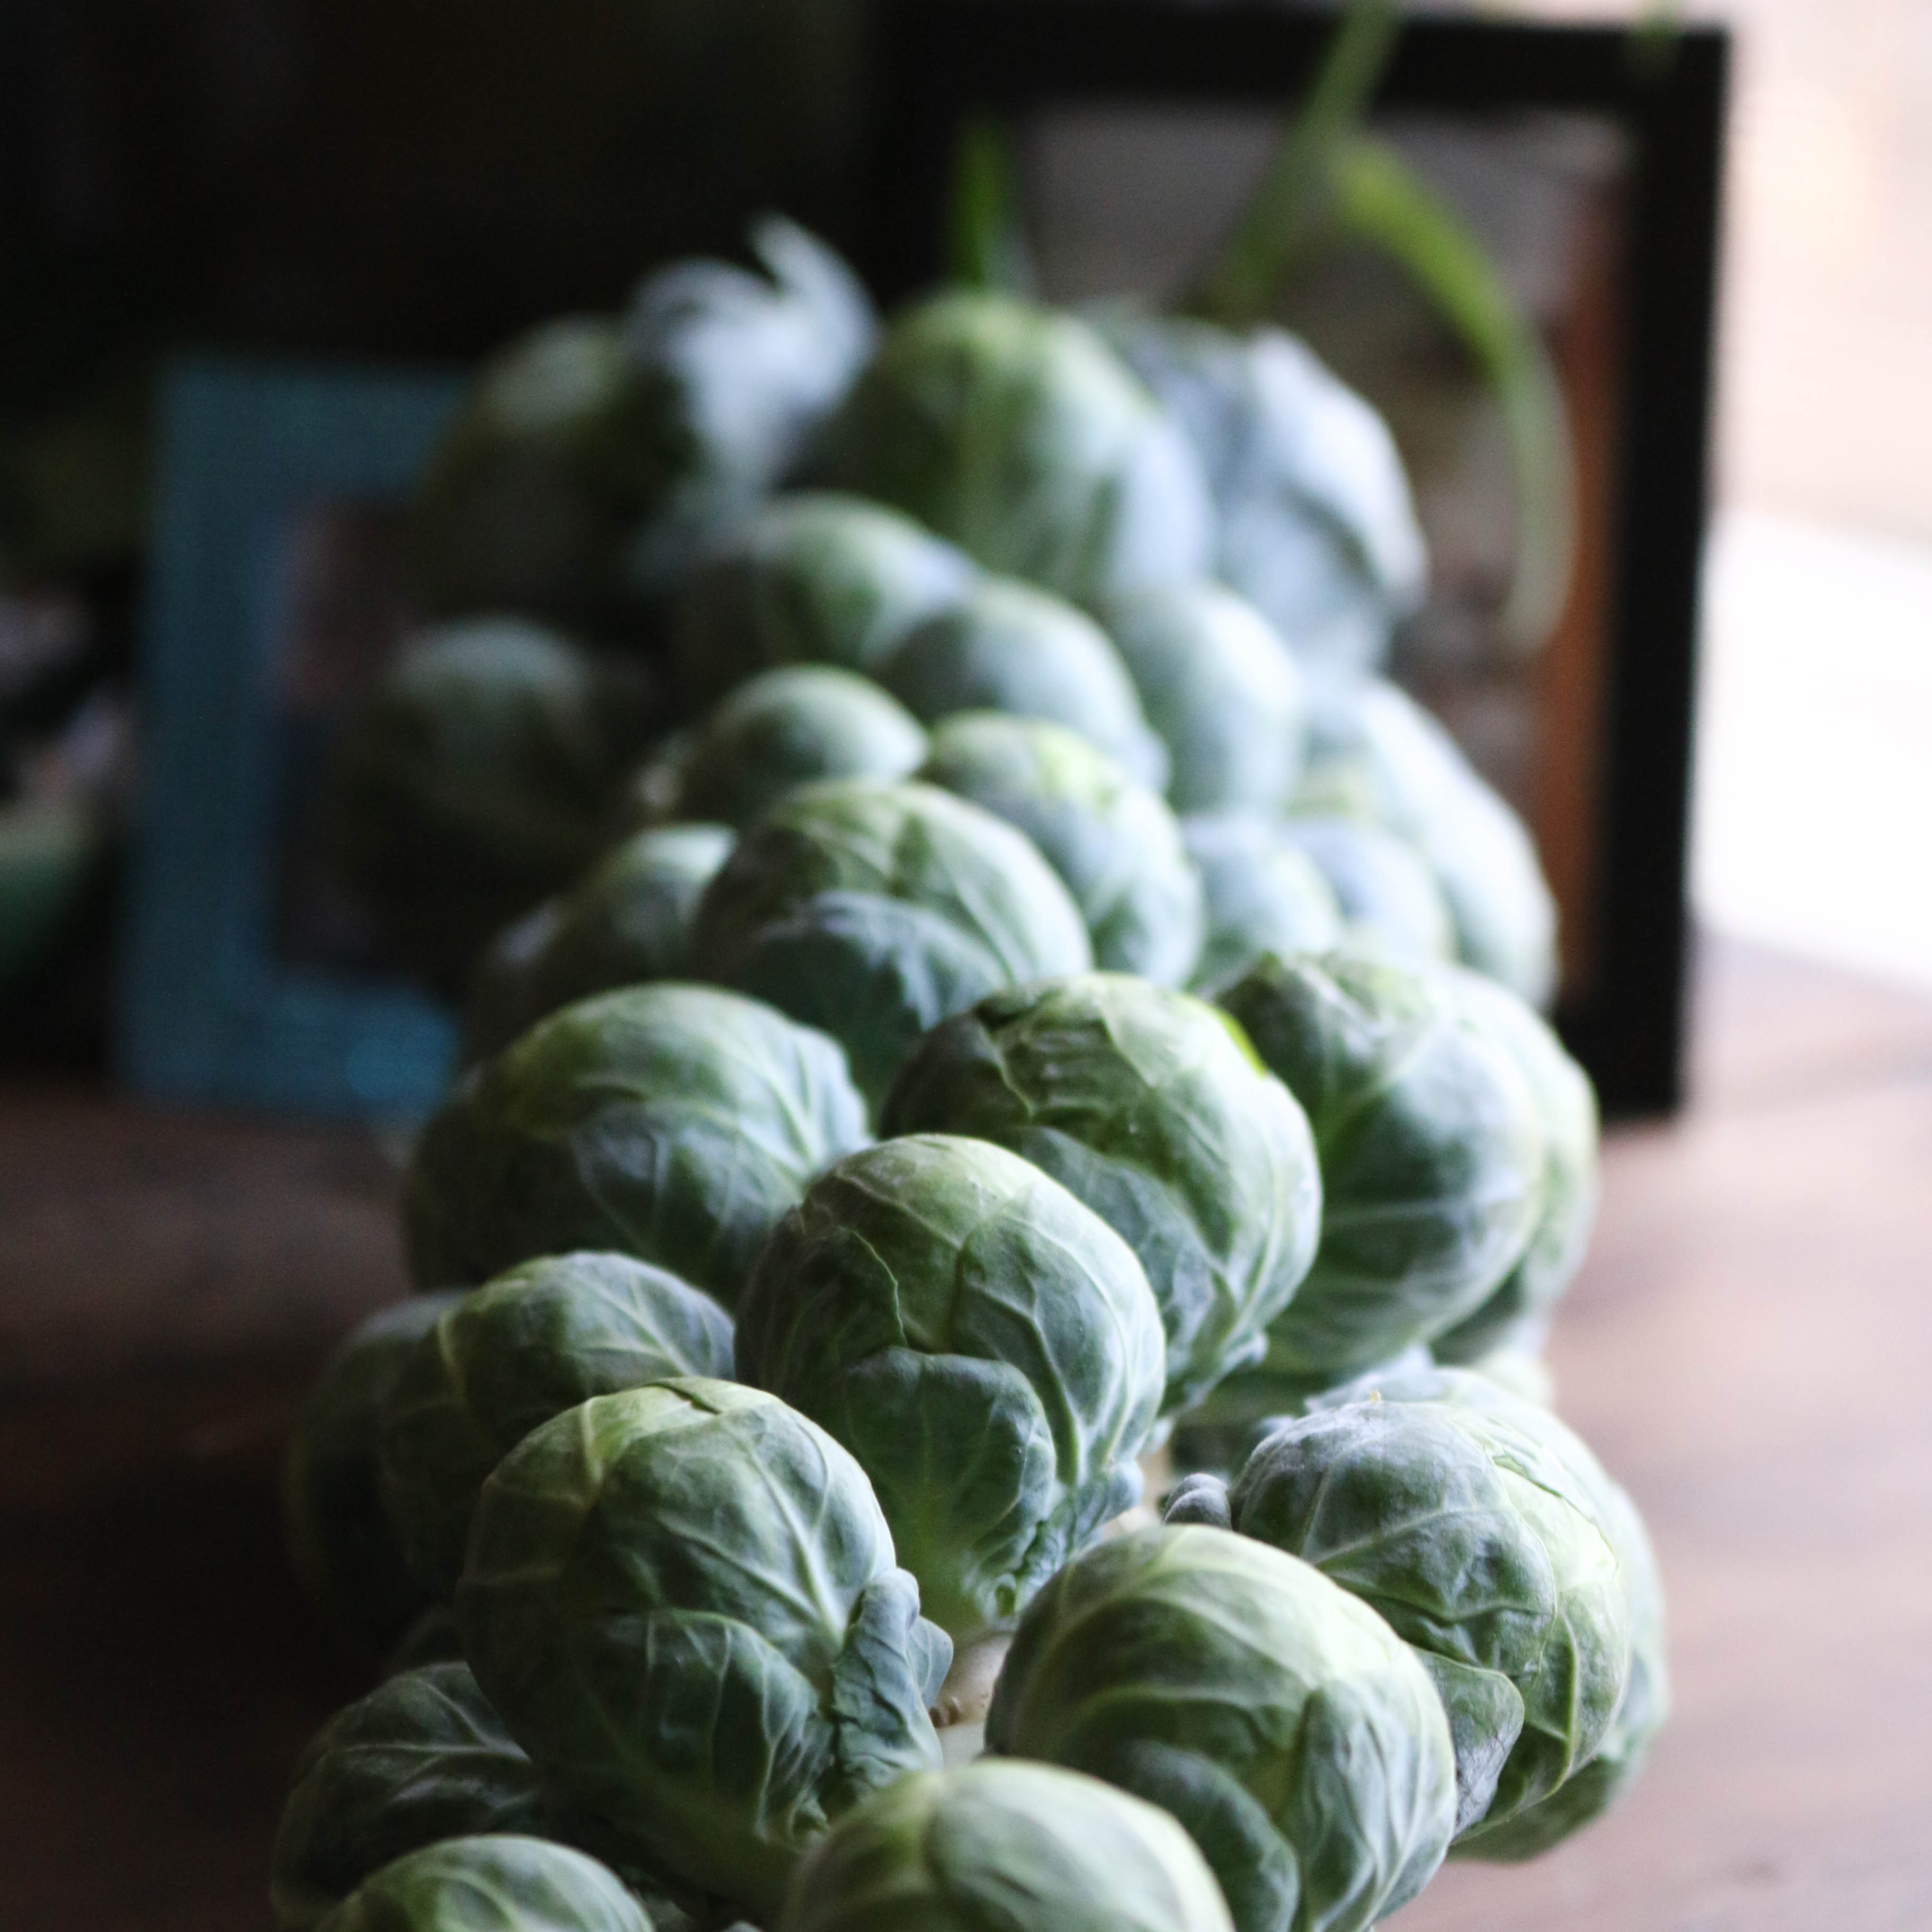 Thai Chili Brussel Sprouts